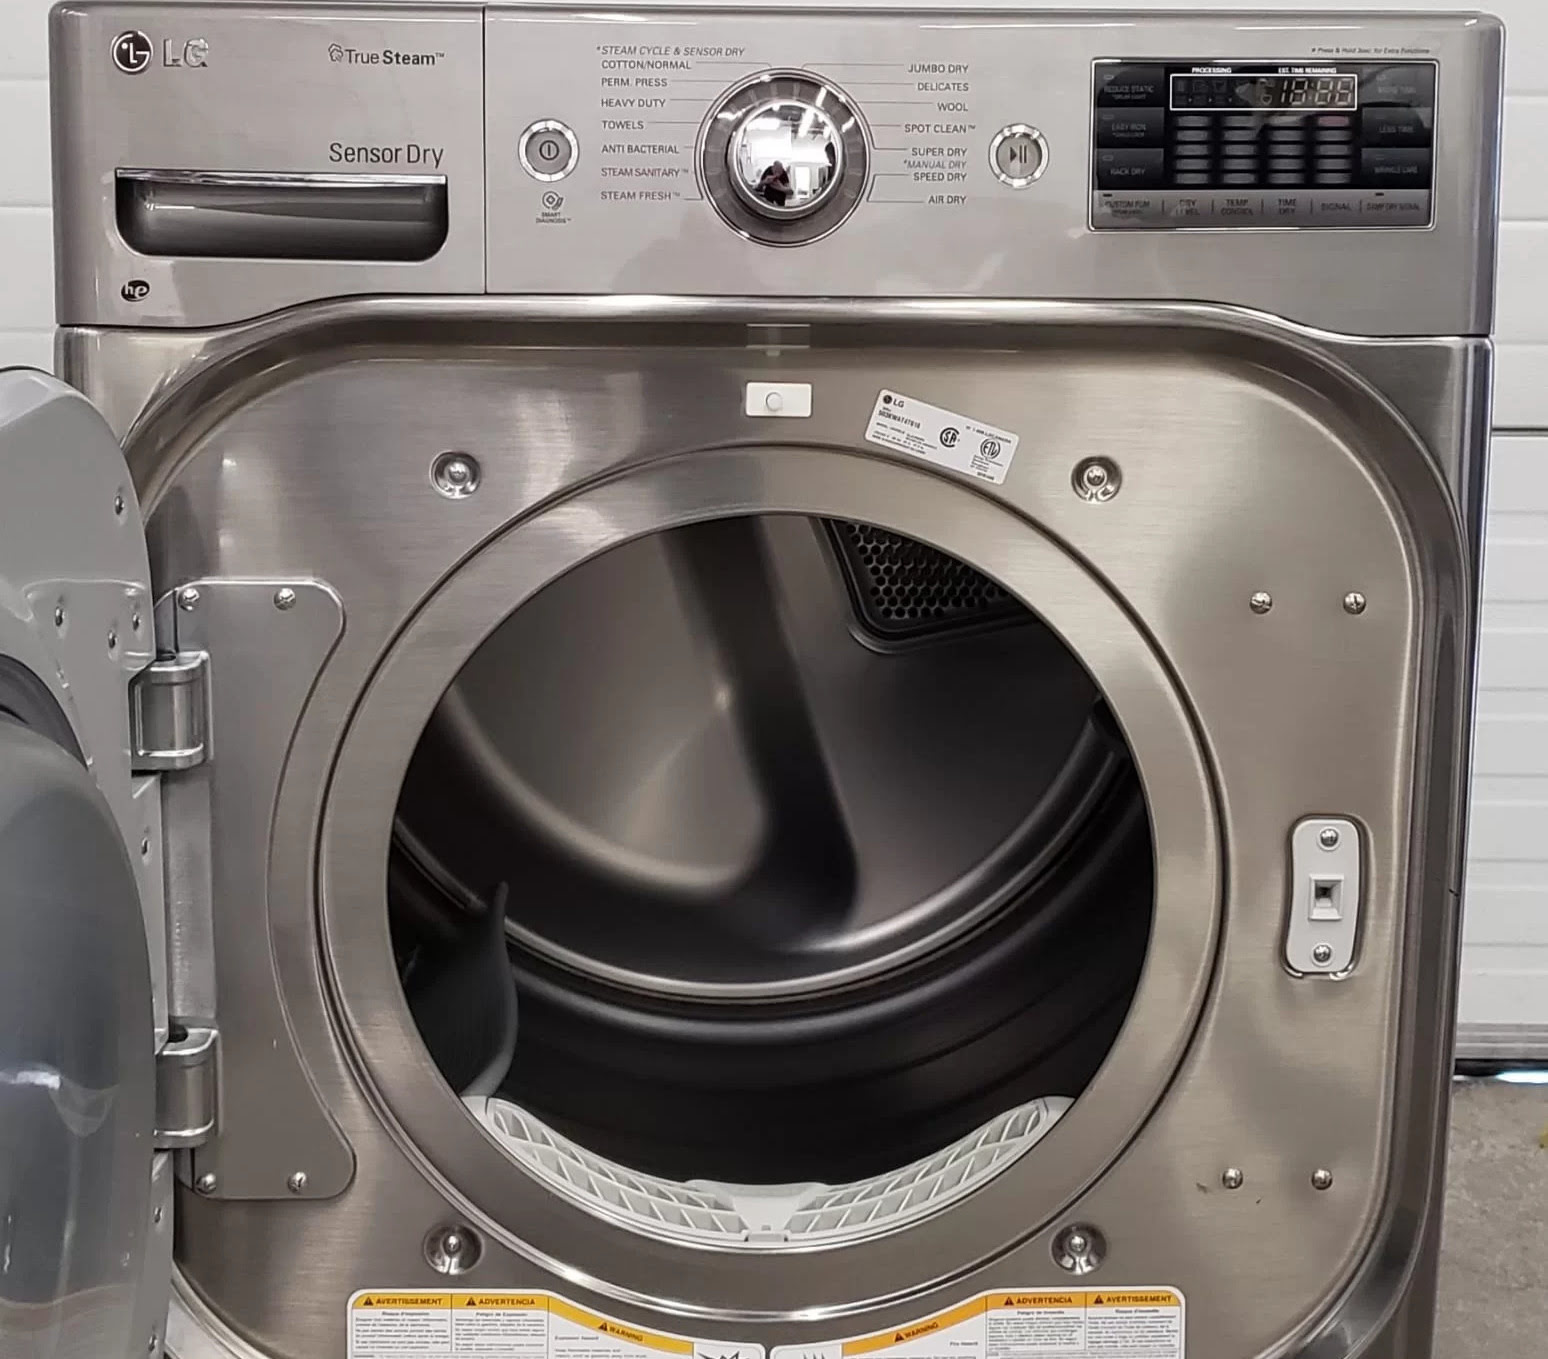 How To Fix The Error Code TE3 For LG Dryer